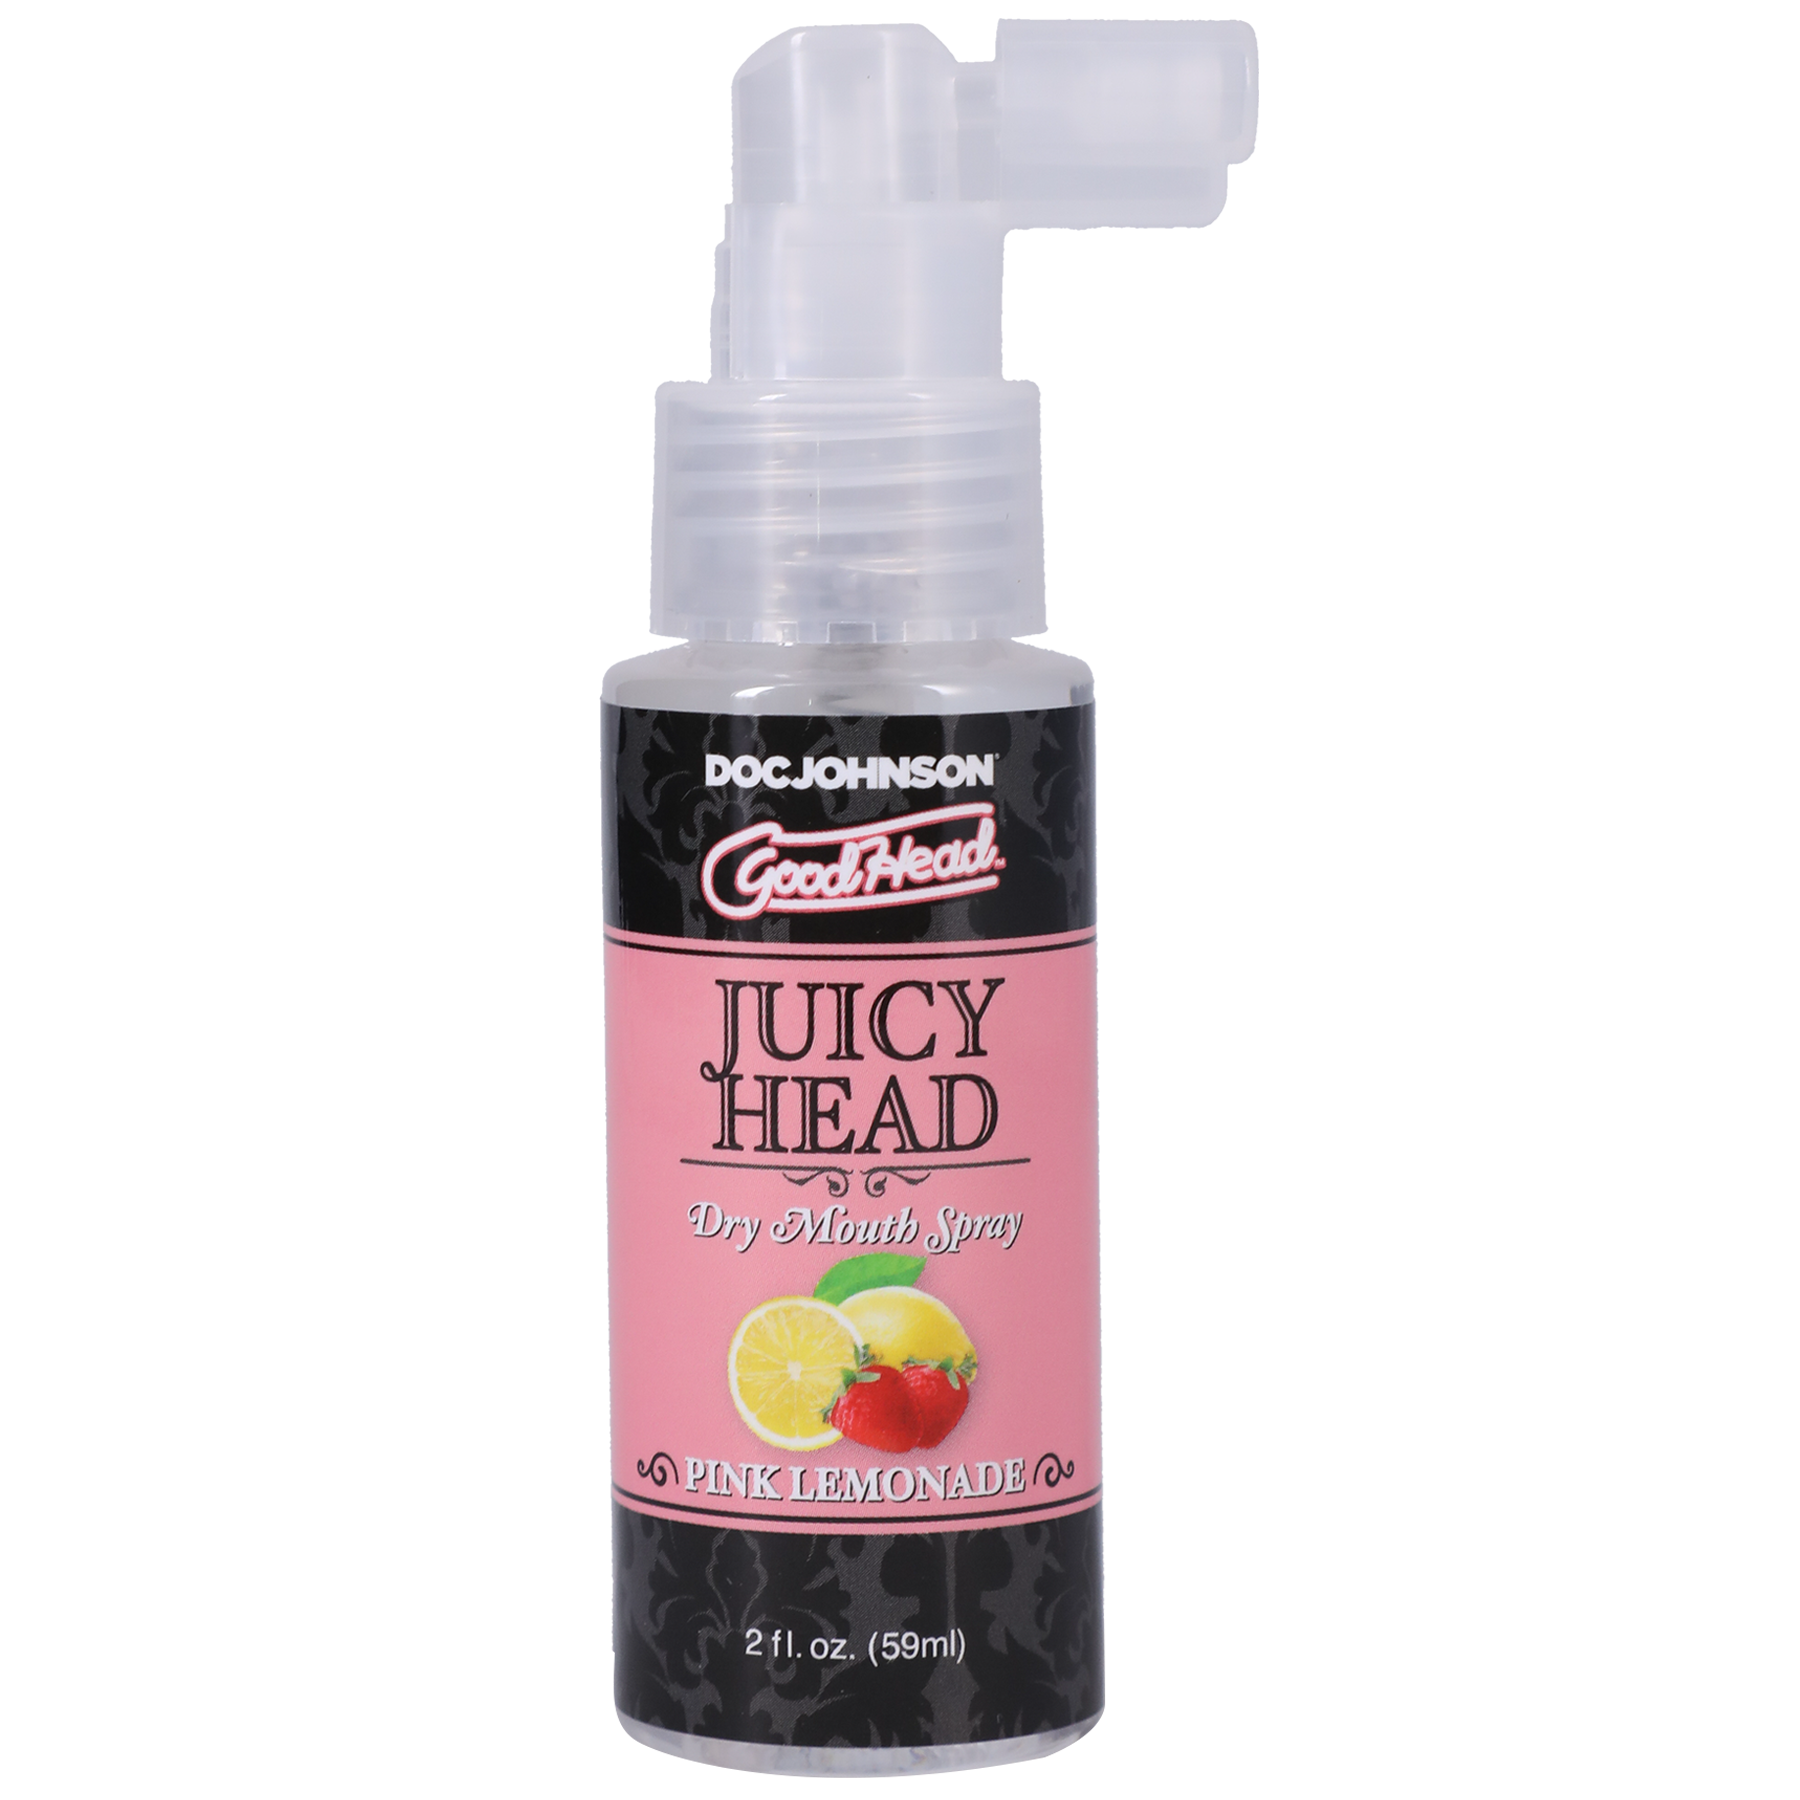 Photo of the bottle of GoodHead Juicy Head from Doc Johson pink lemonade ) shows its easy to use pump spray nozzle.